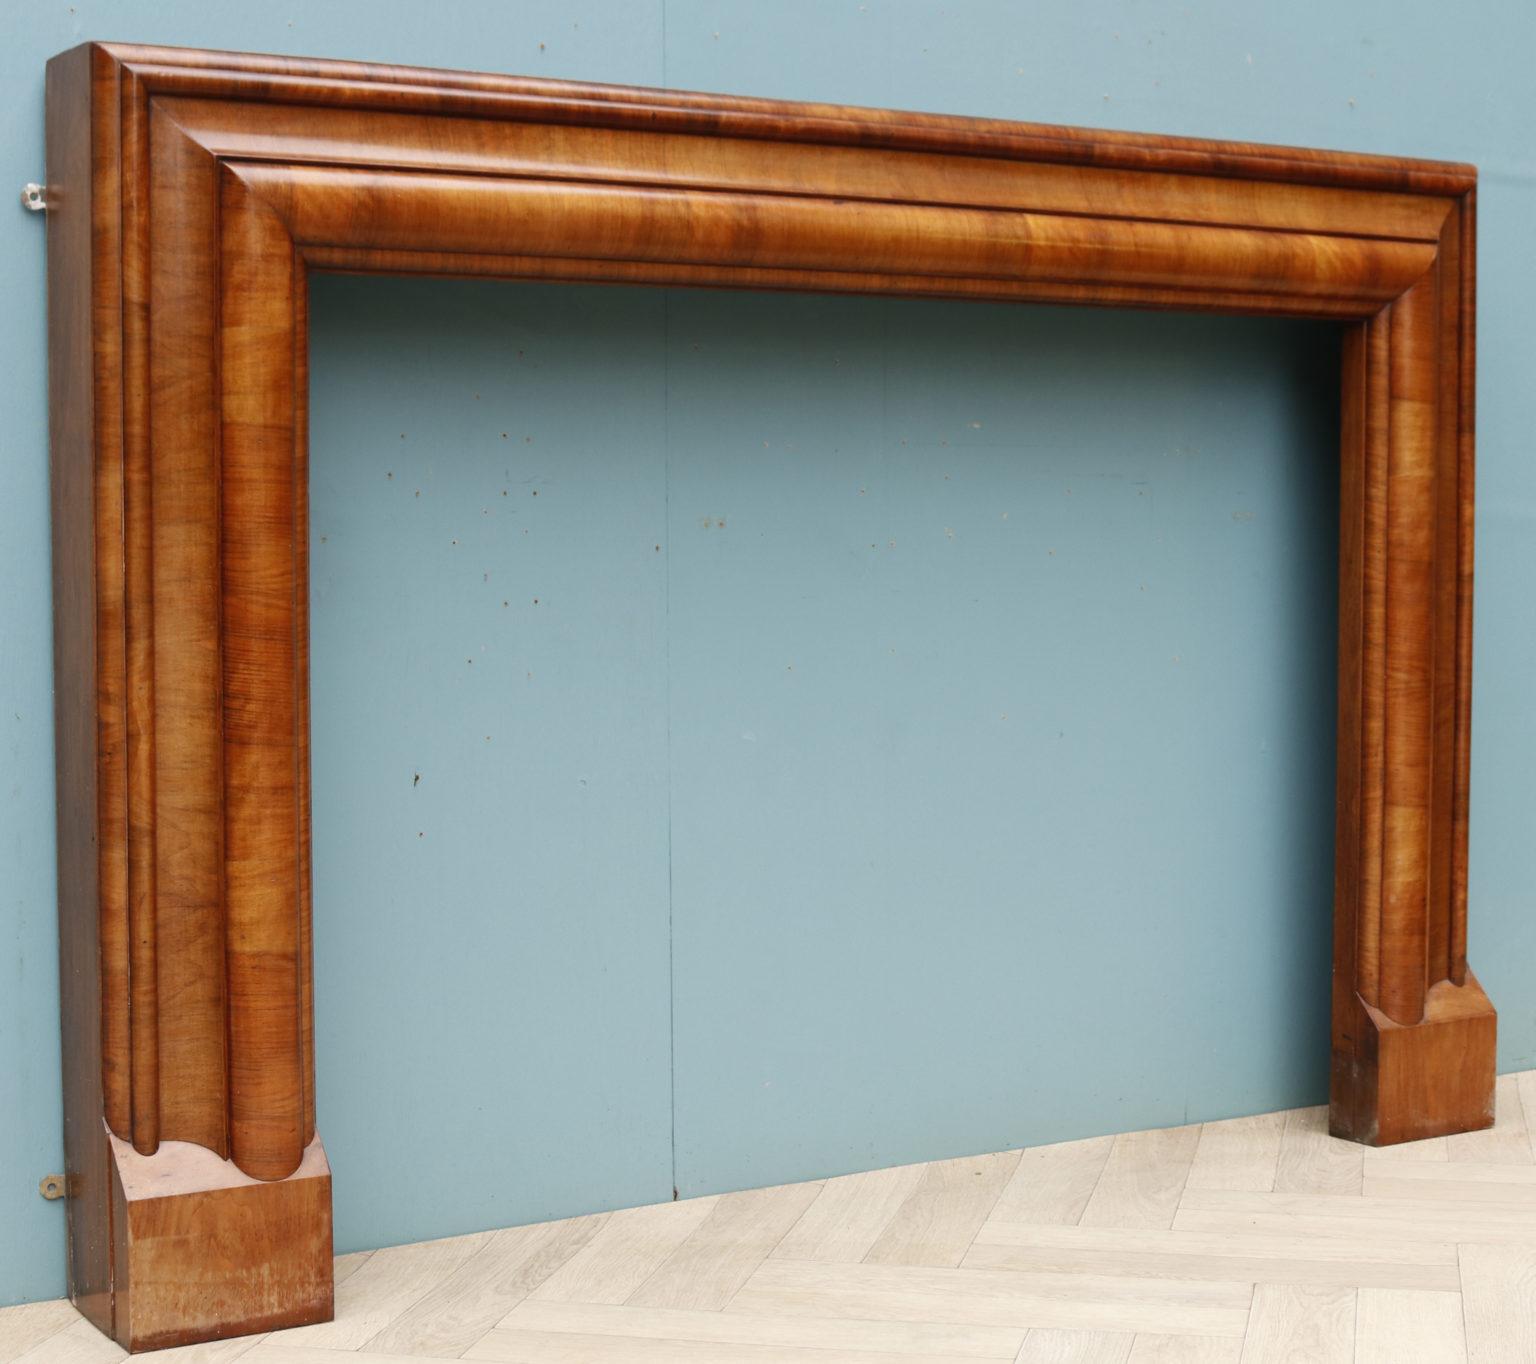 Art Deco Style Reclaimed Bolection Mantel In Fair Condition For Sale In Wormelow, Herefordshire